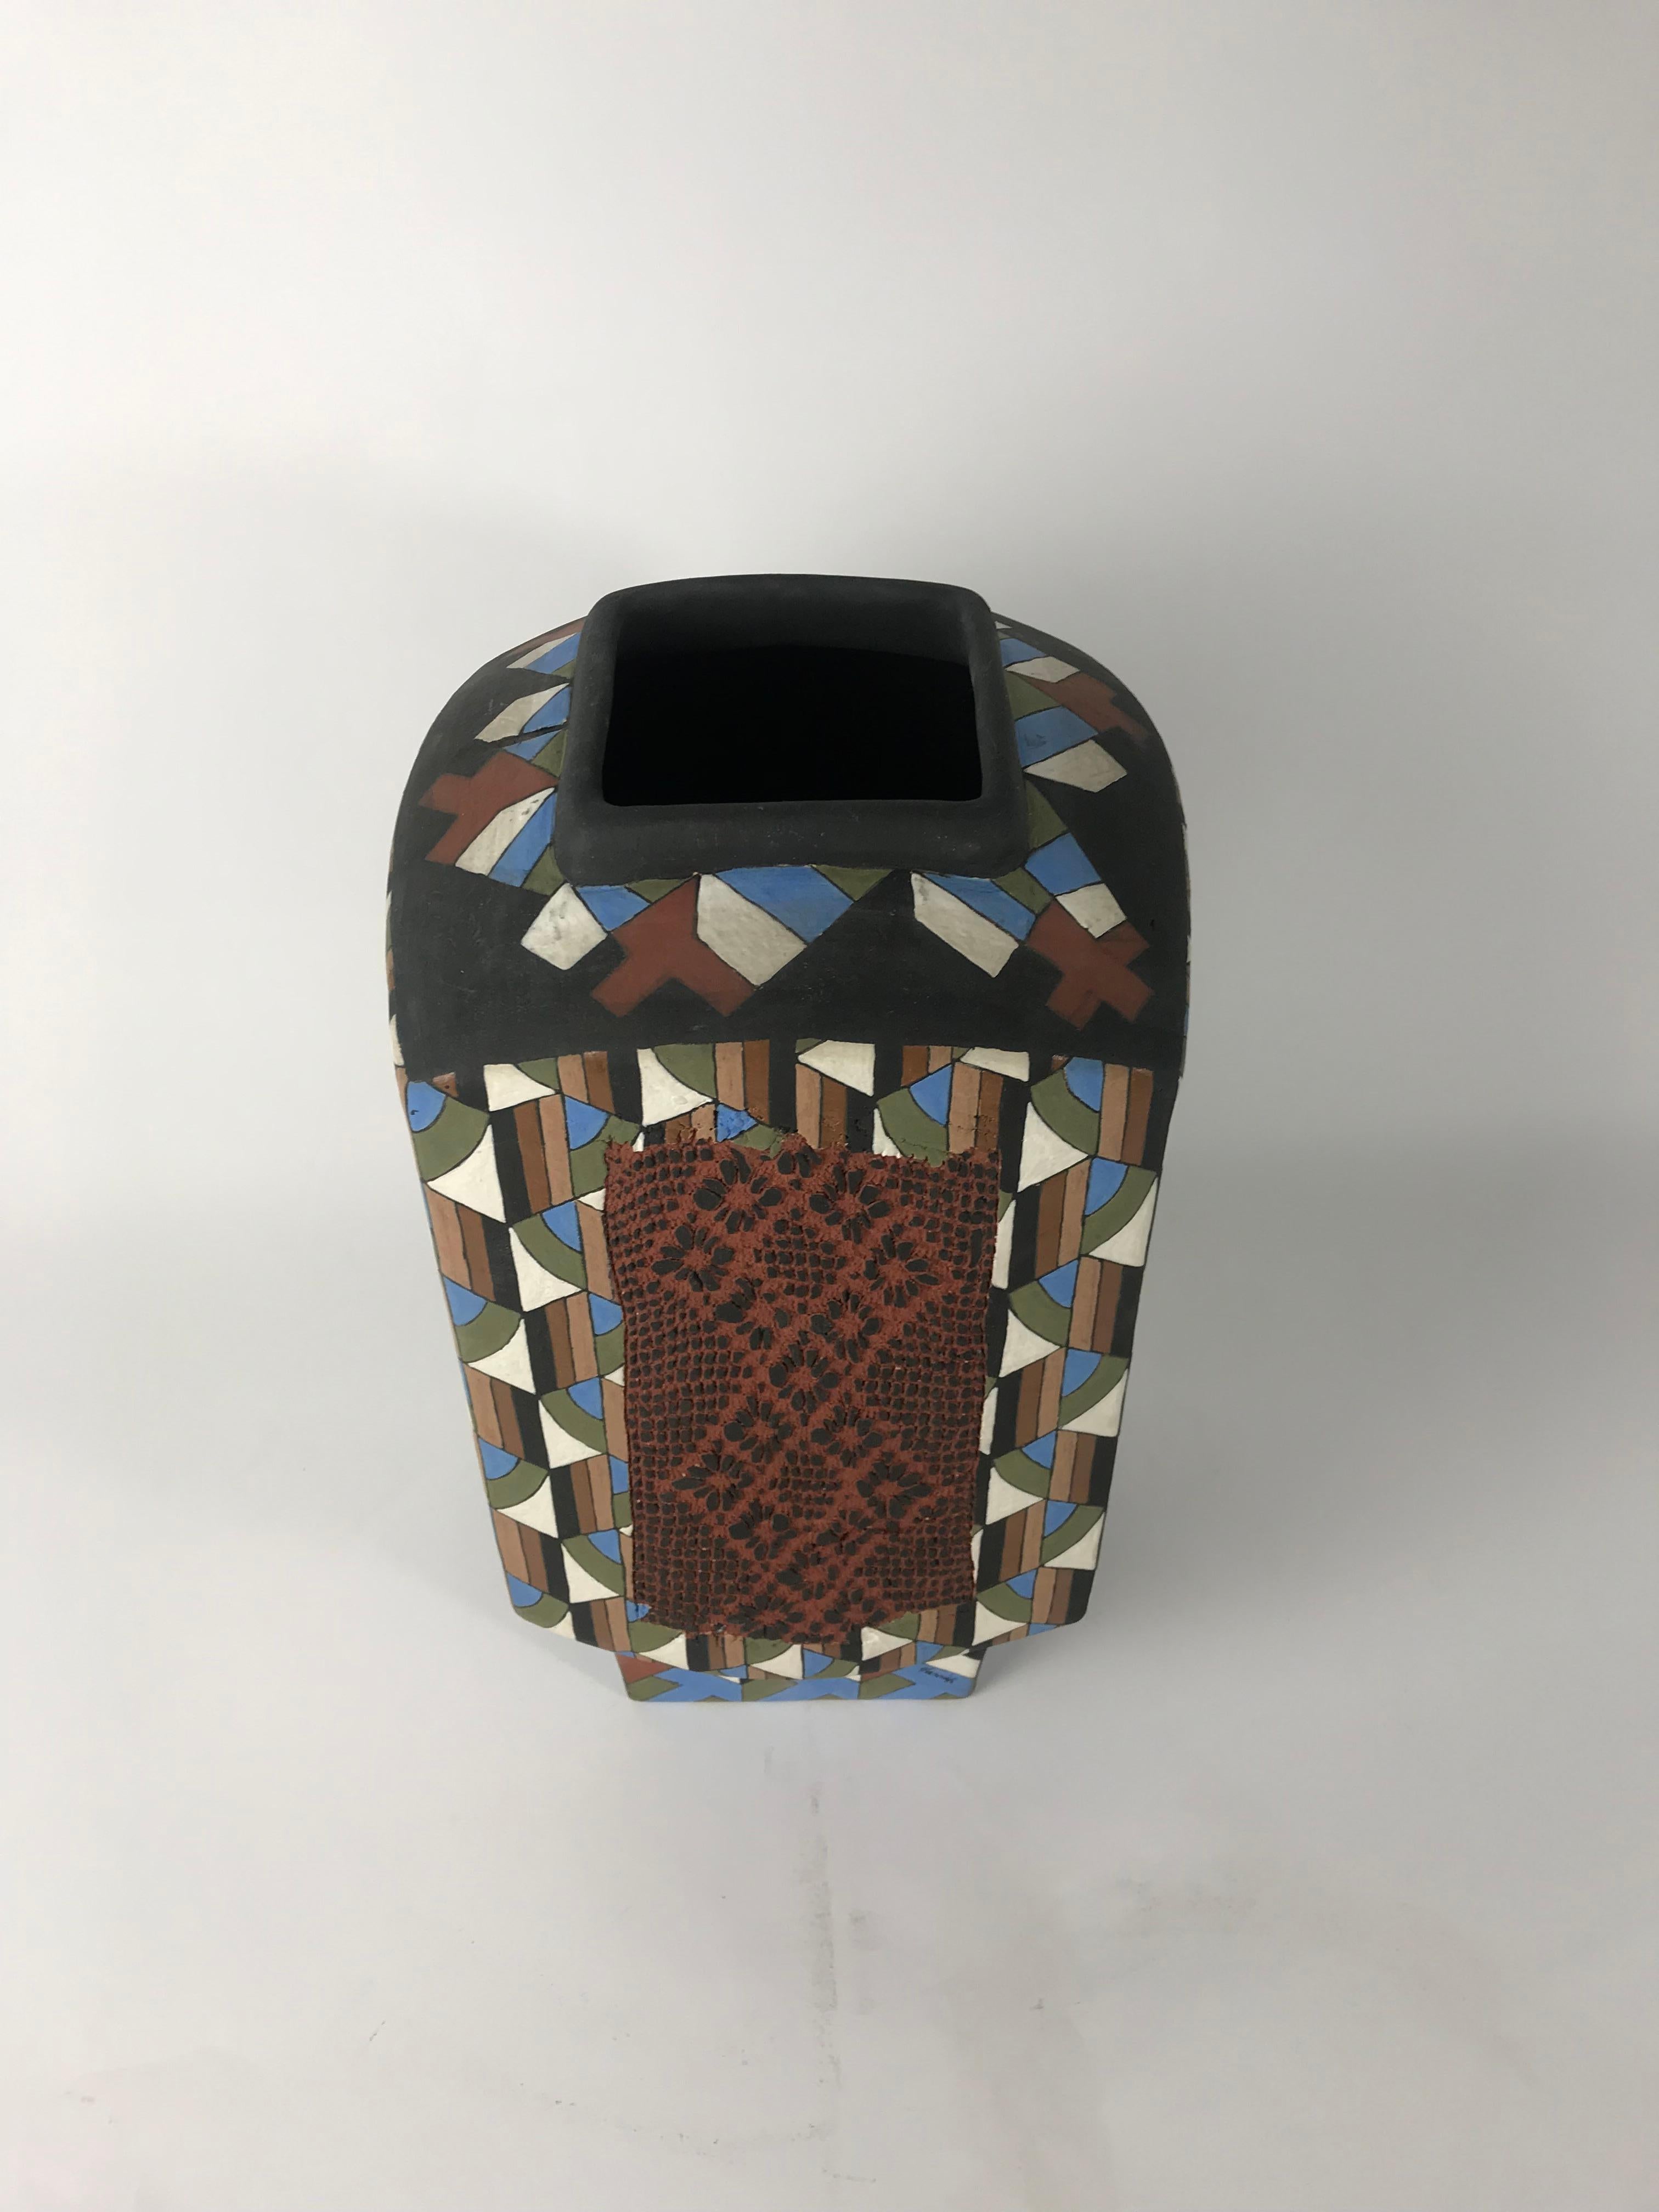 Ceramic Covered Cubist Vase/Pot by Phillip and Marilyn Garnick 10